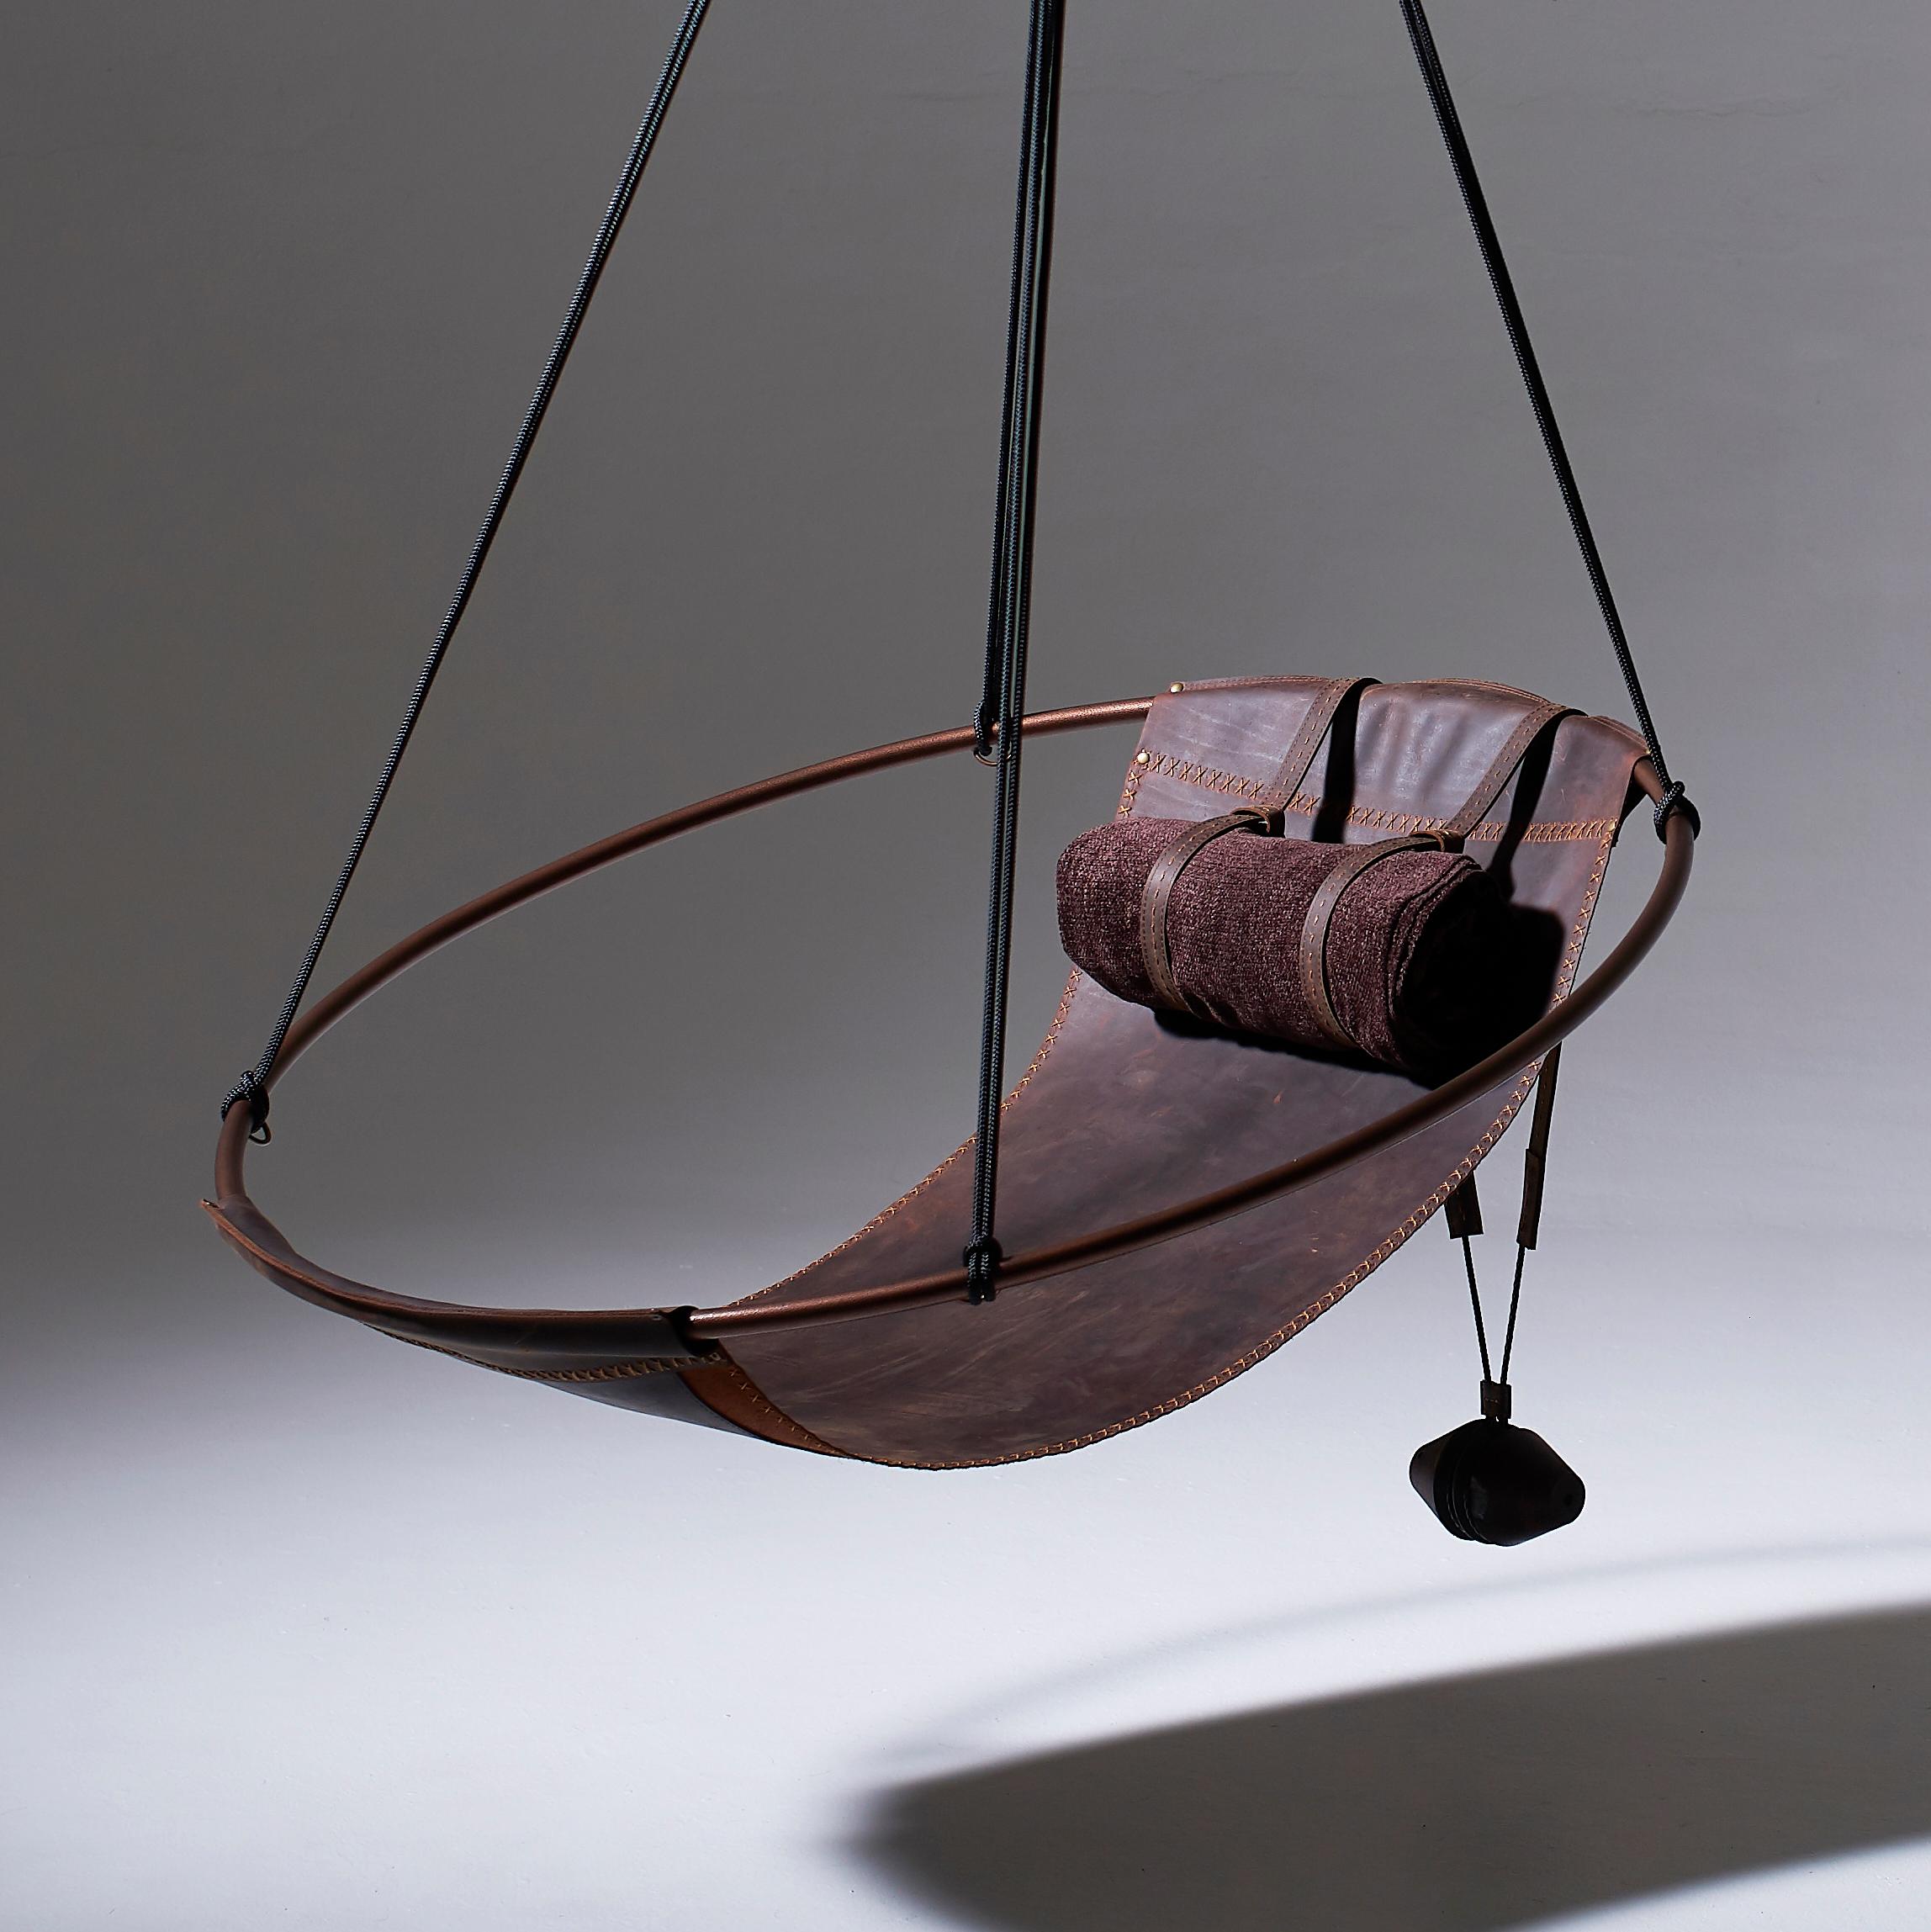 Stripped away from all excess, this hanging chair has a circular frame with the seat made of leather hanging loose within it, to create a sleek, sexy, and oh so comfortable experience. This chair’s clean lines and lightness makes it a perfect fit